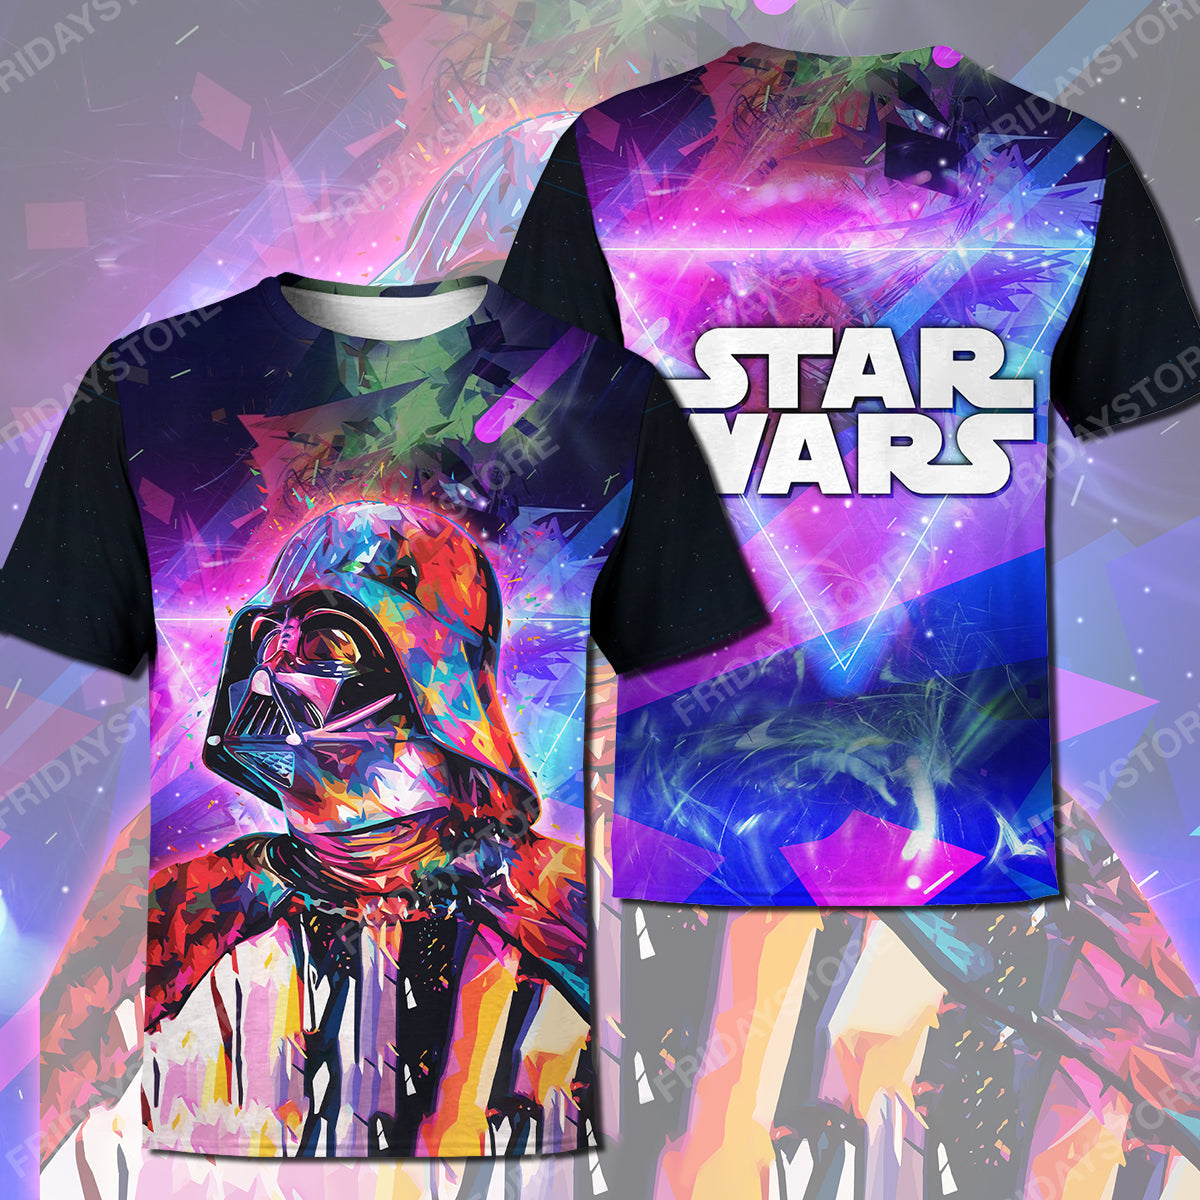 Unifinz SW T-shirt SW Darth Vader Colorful T-shirt Cool High Quality SW Hoodie Sweater Tank 2025